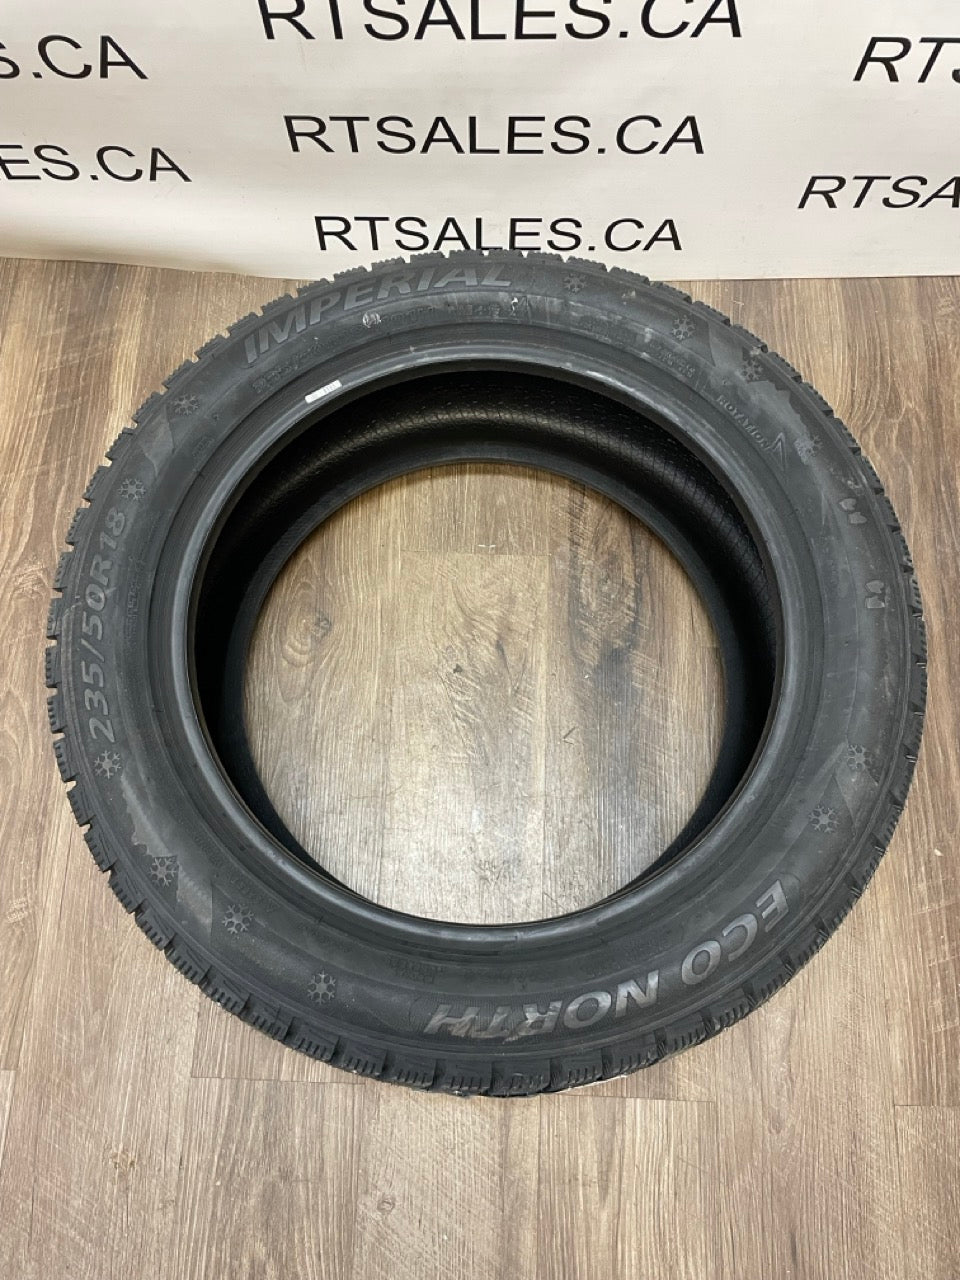 235/50/18 Imperial Imperial ECO NORTH STUDDED Winter Tires